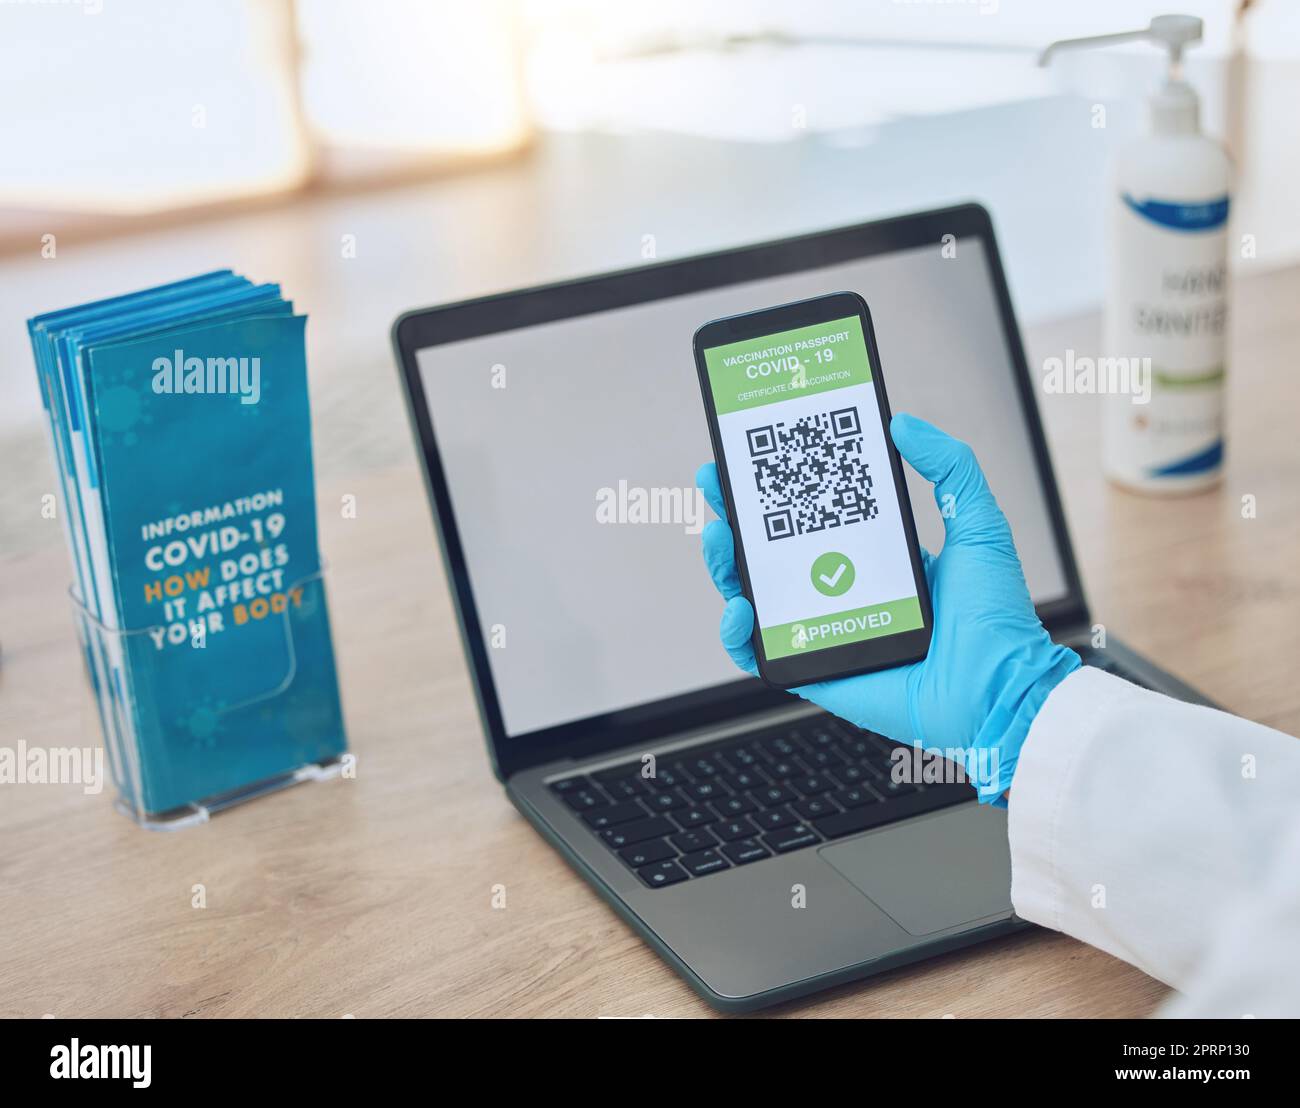 Covid, vaccine and passport on smartphone for travel, safety or security during virus pandemic. Laptop, hands and phone app with digital corona QR code for international, global and safe traveling. Stock Photo